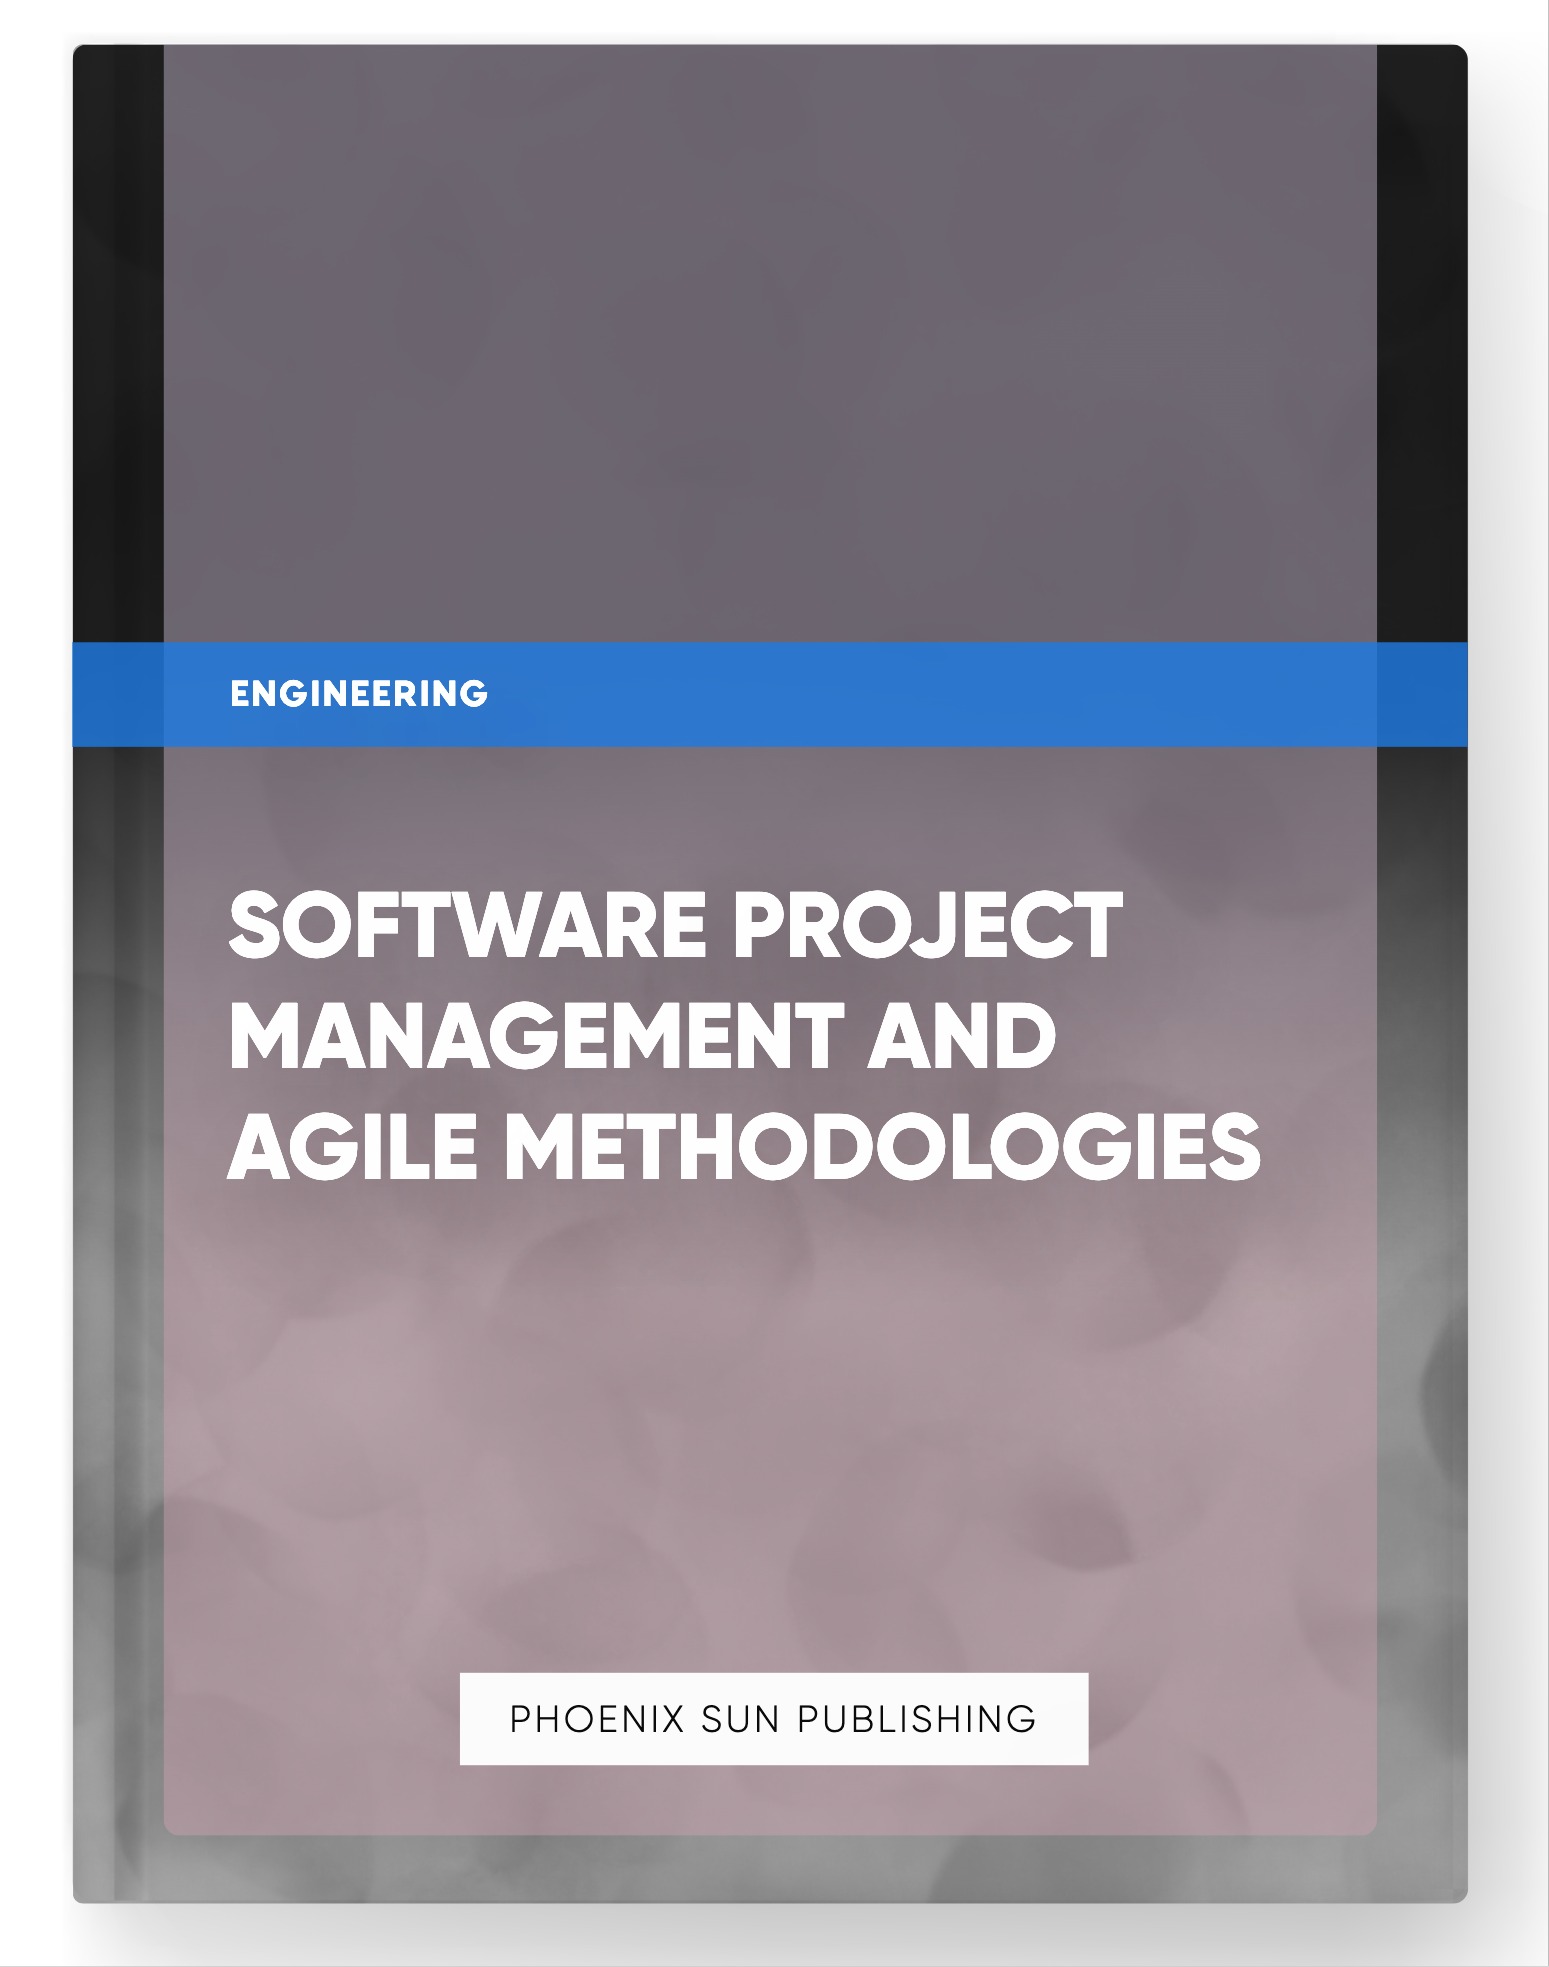 Software Project Management and Agile Methodologies